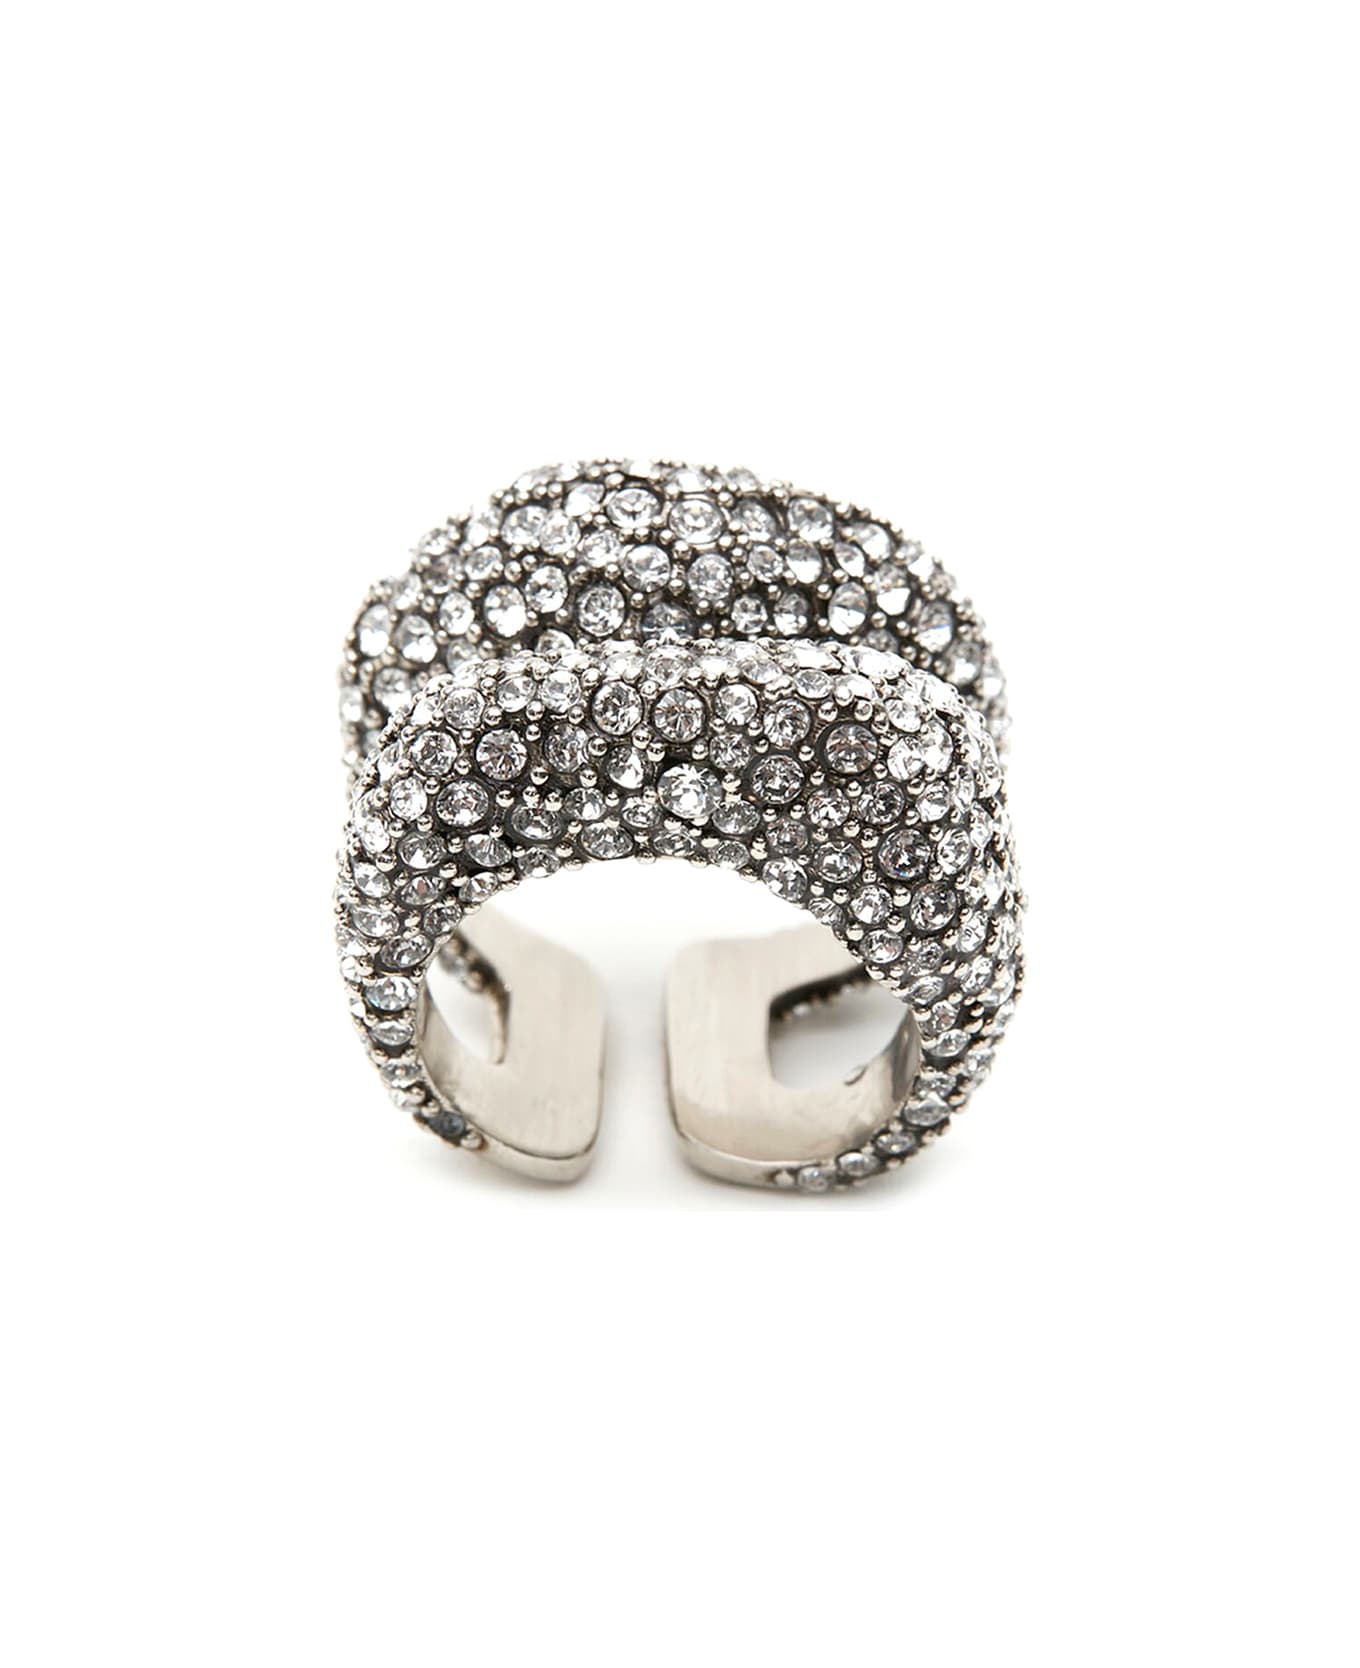 Alexander McQueen Pave Cut Out Ring - Crystal